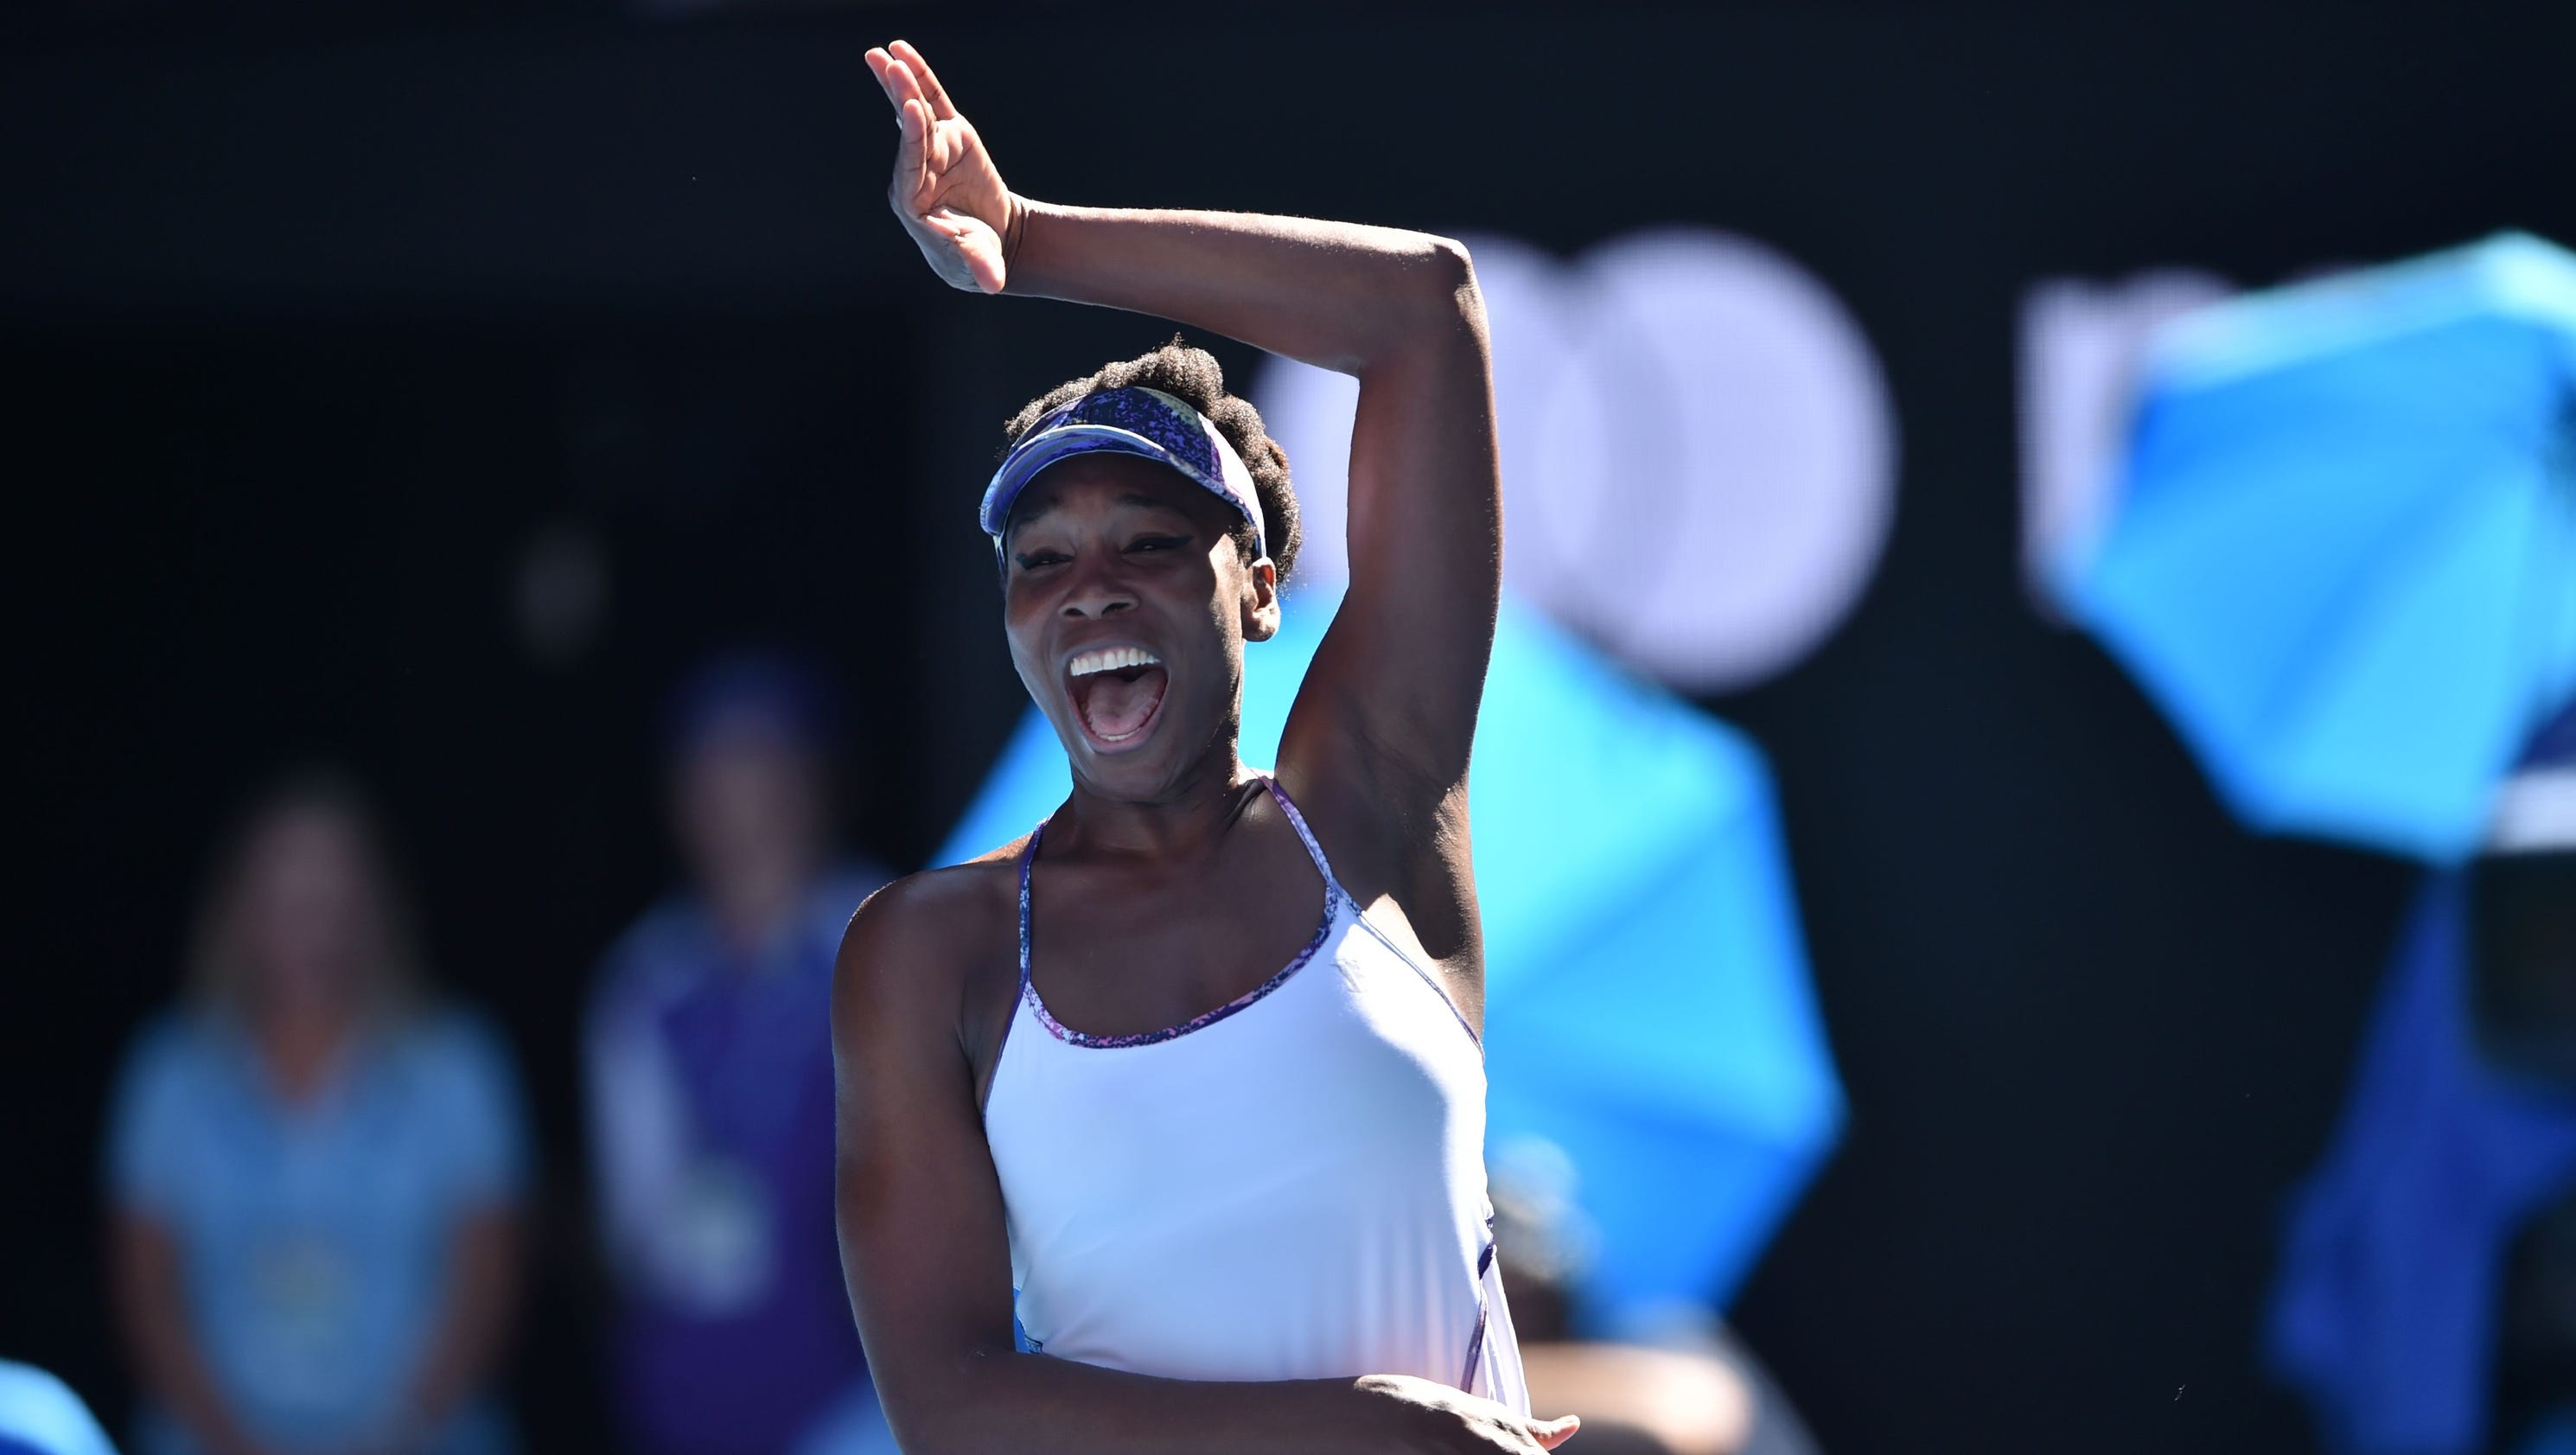 Venus Williams can't contain herself after reaching Australian Open final